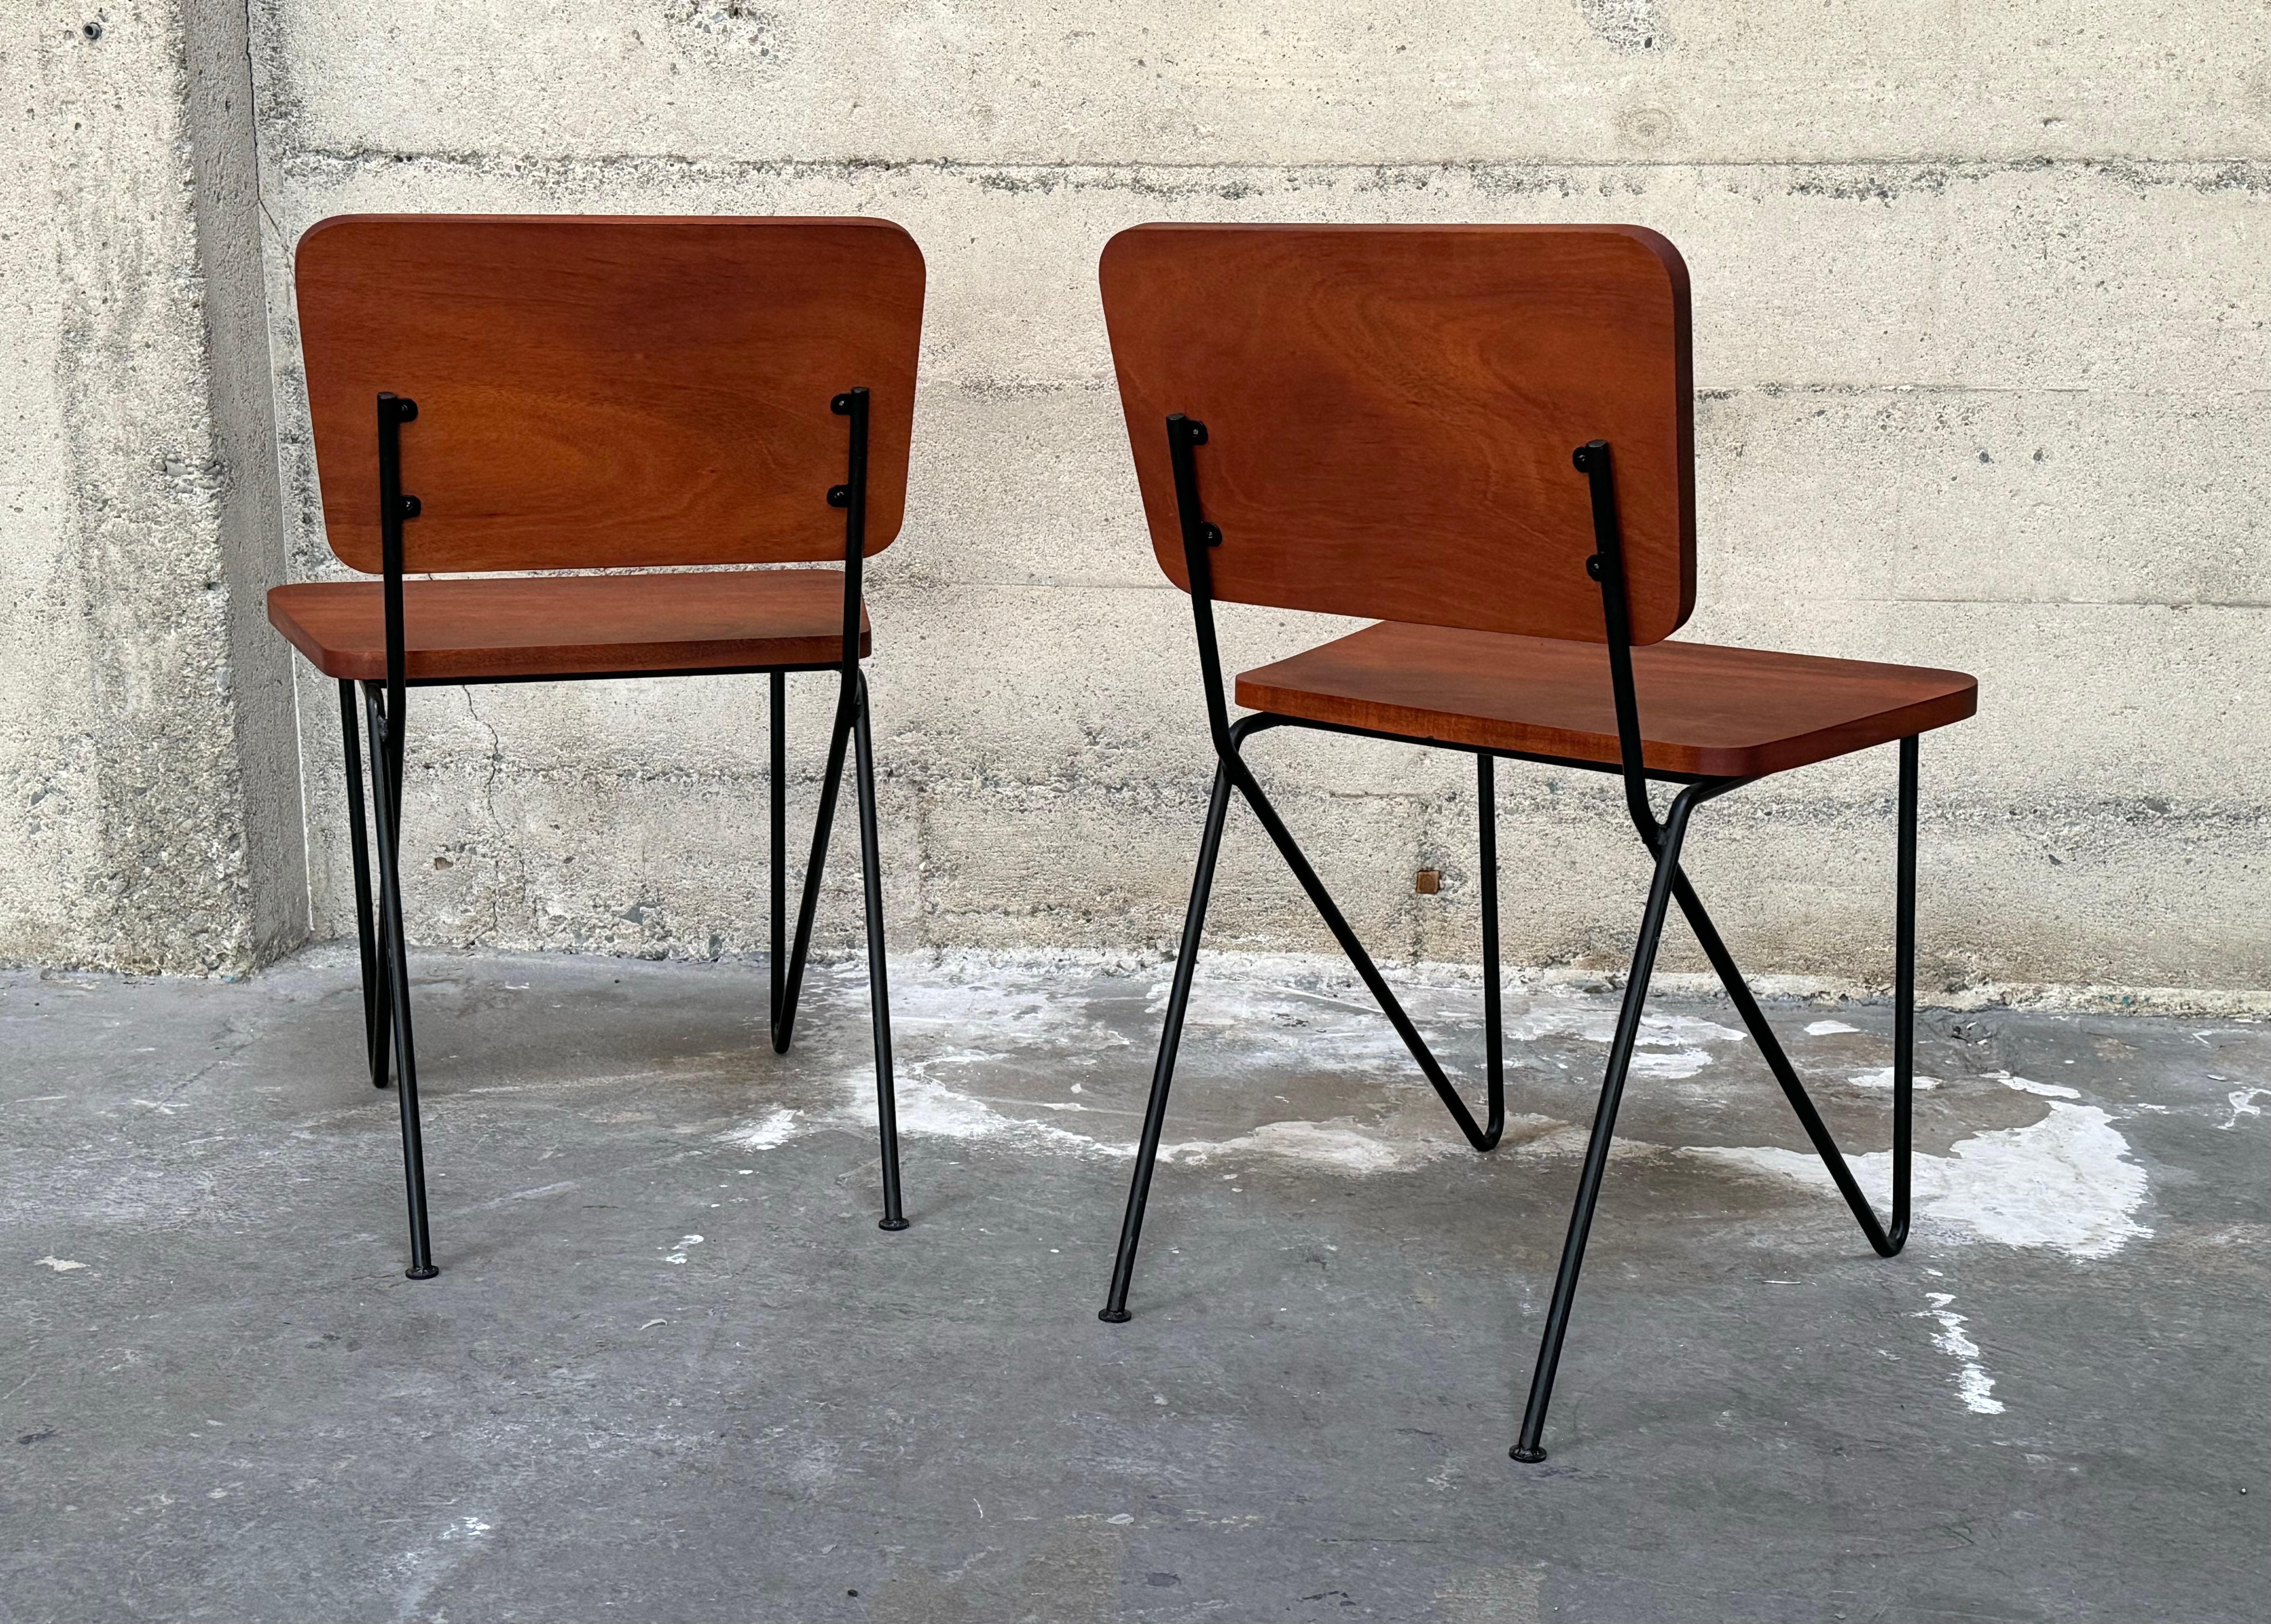 Pair of 1950s California Design Iron and Tropical Hardwood Side Chairs For Sale 3